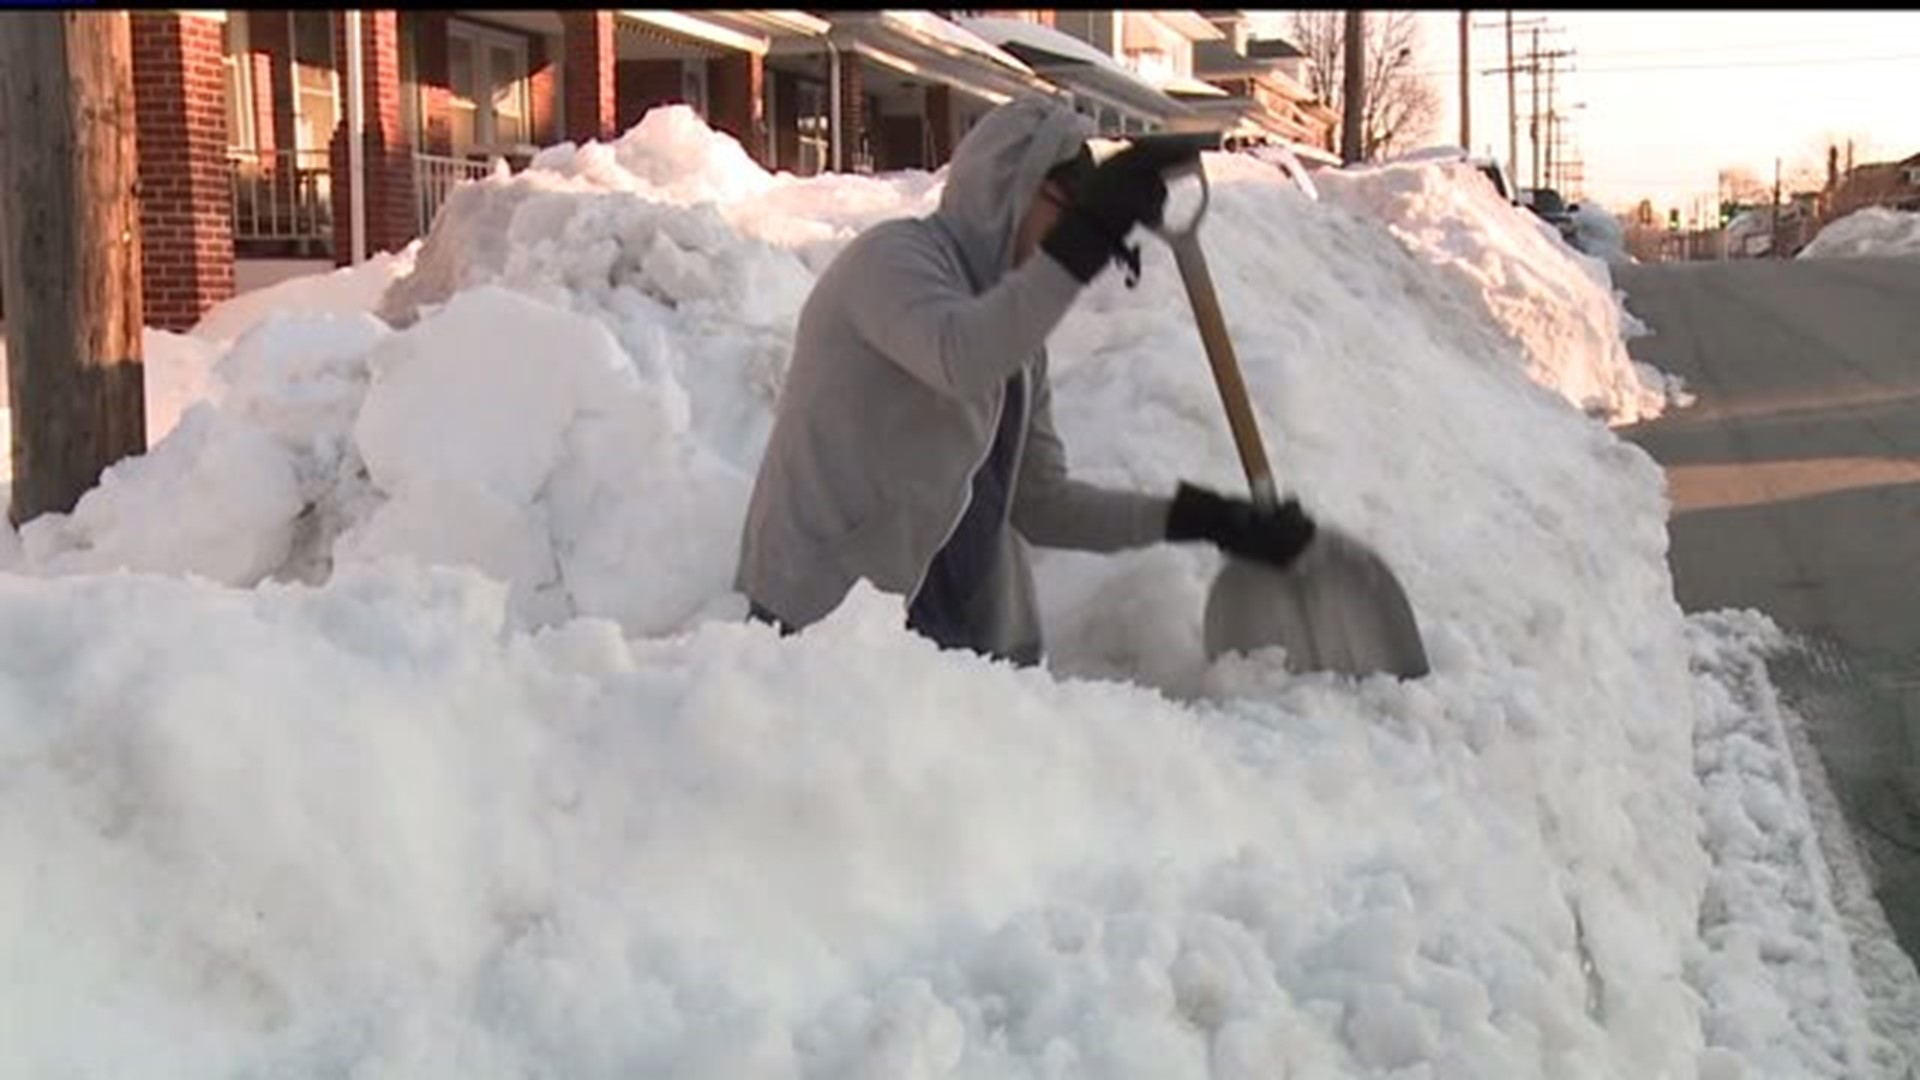 West York residents warned to clear sidewalks or face a fine